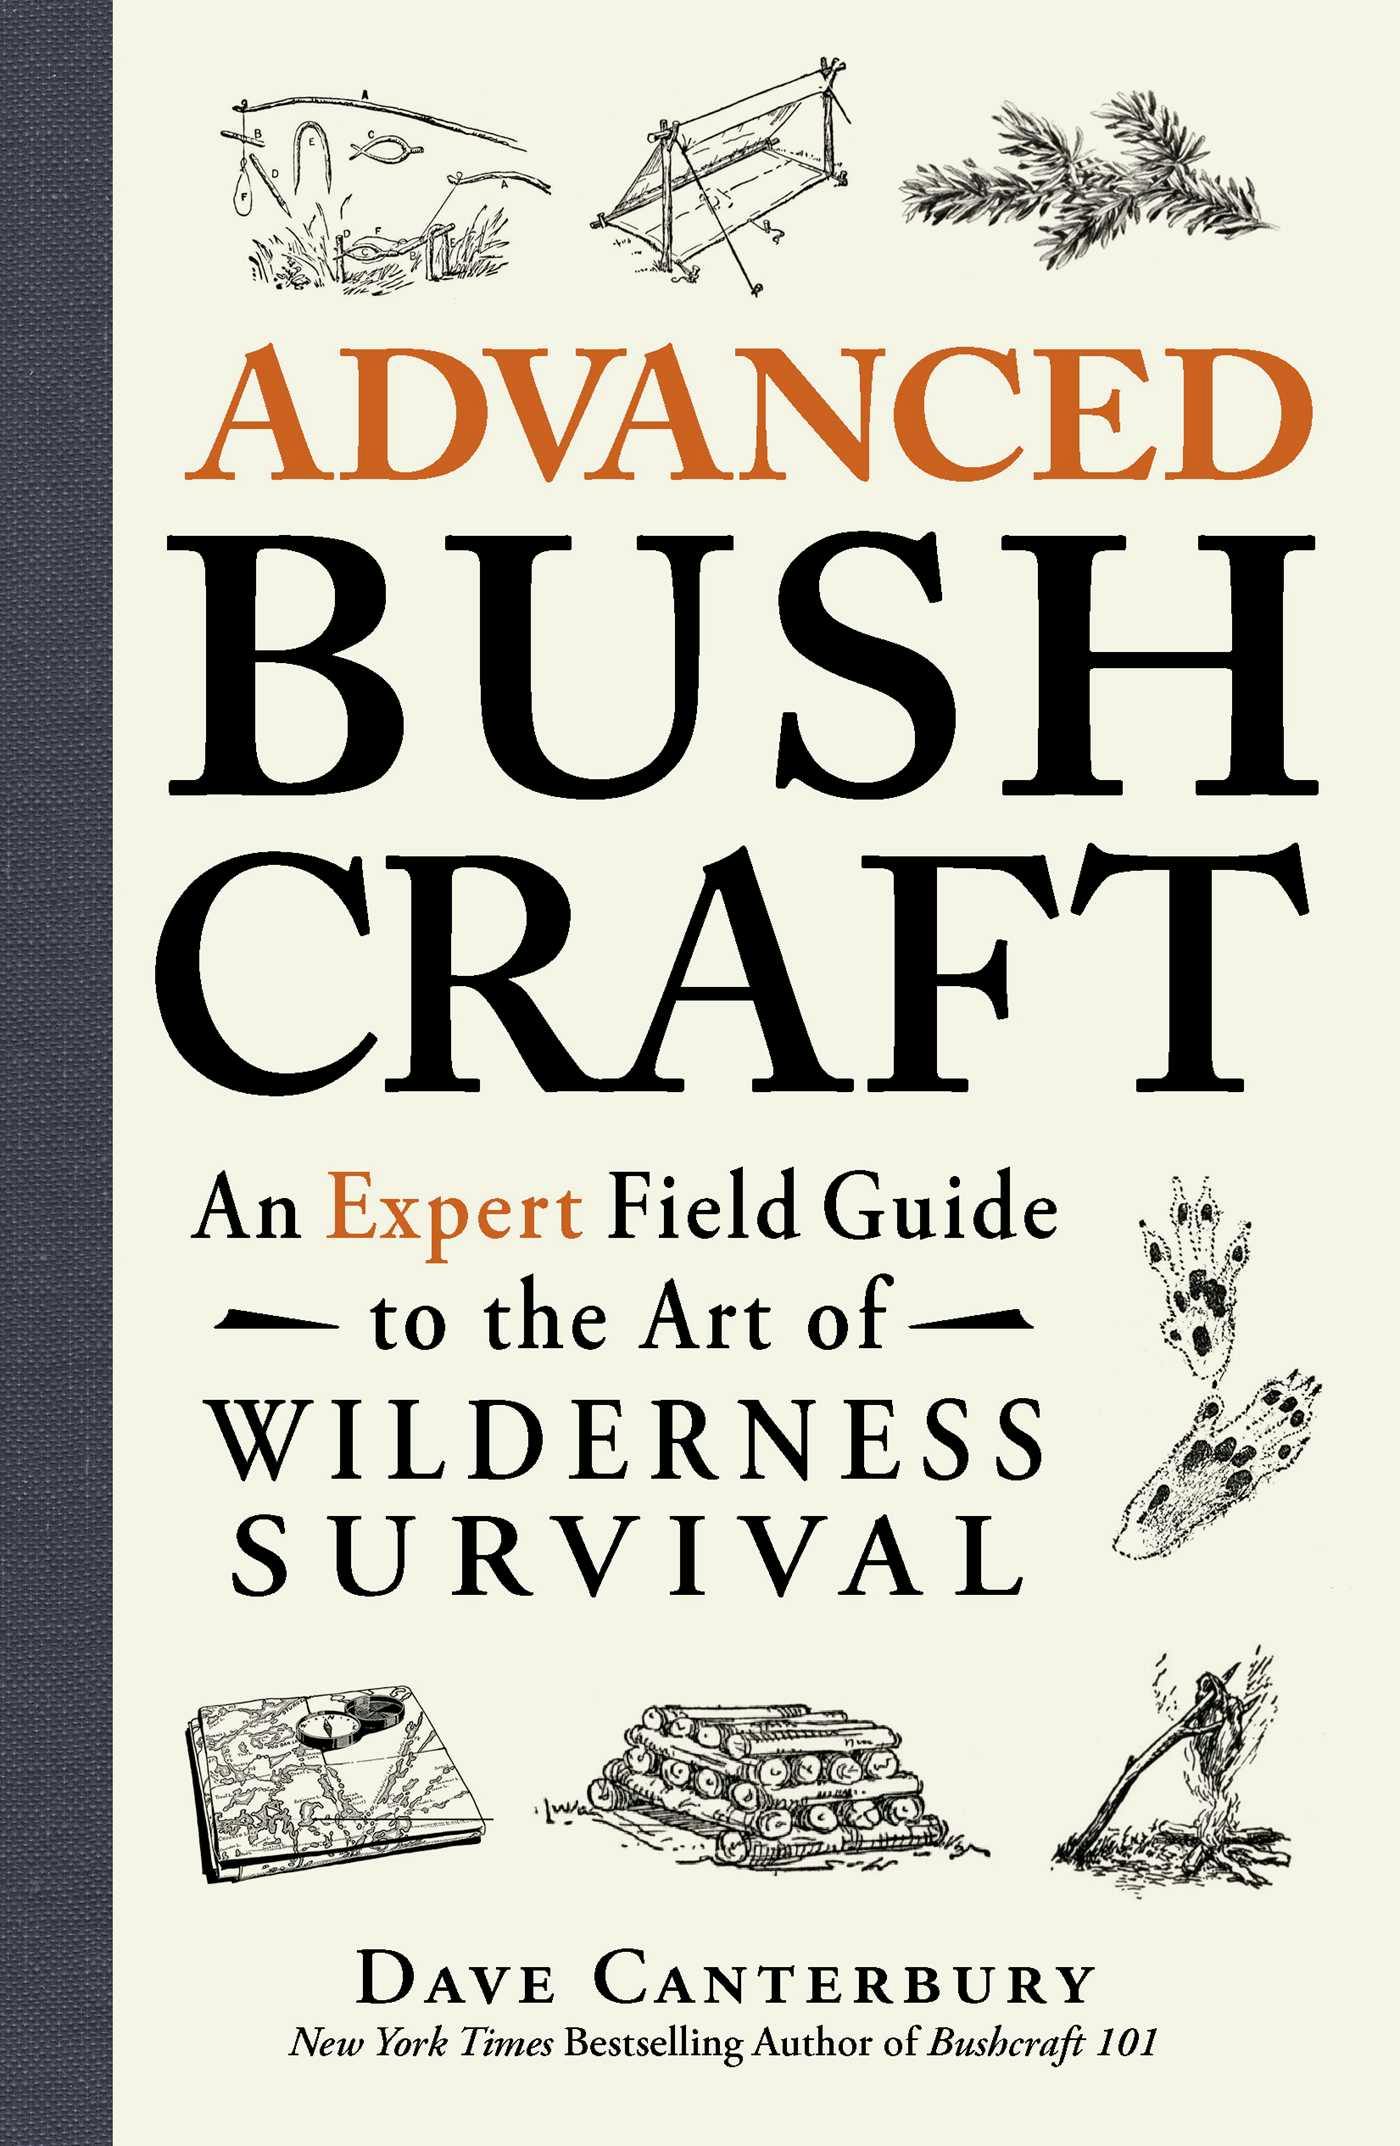 Advanced Bushcraft: An Expert Field Guide to the Art of Wilderness Survival - undefined